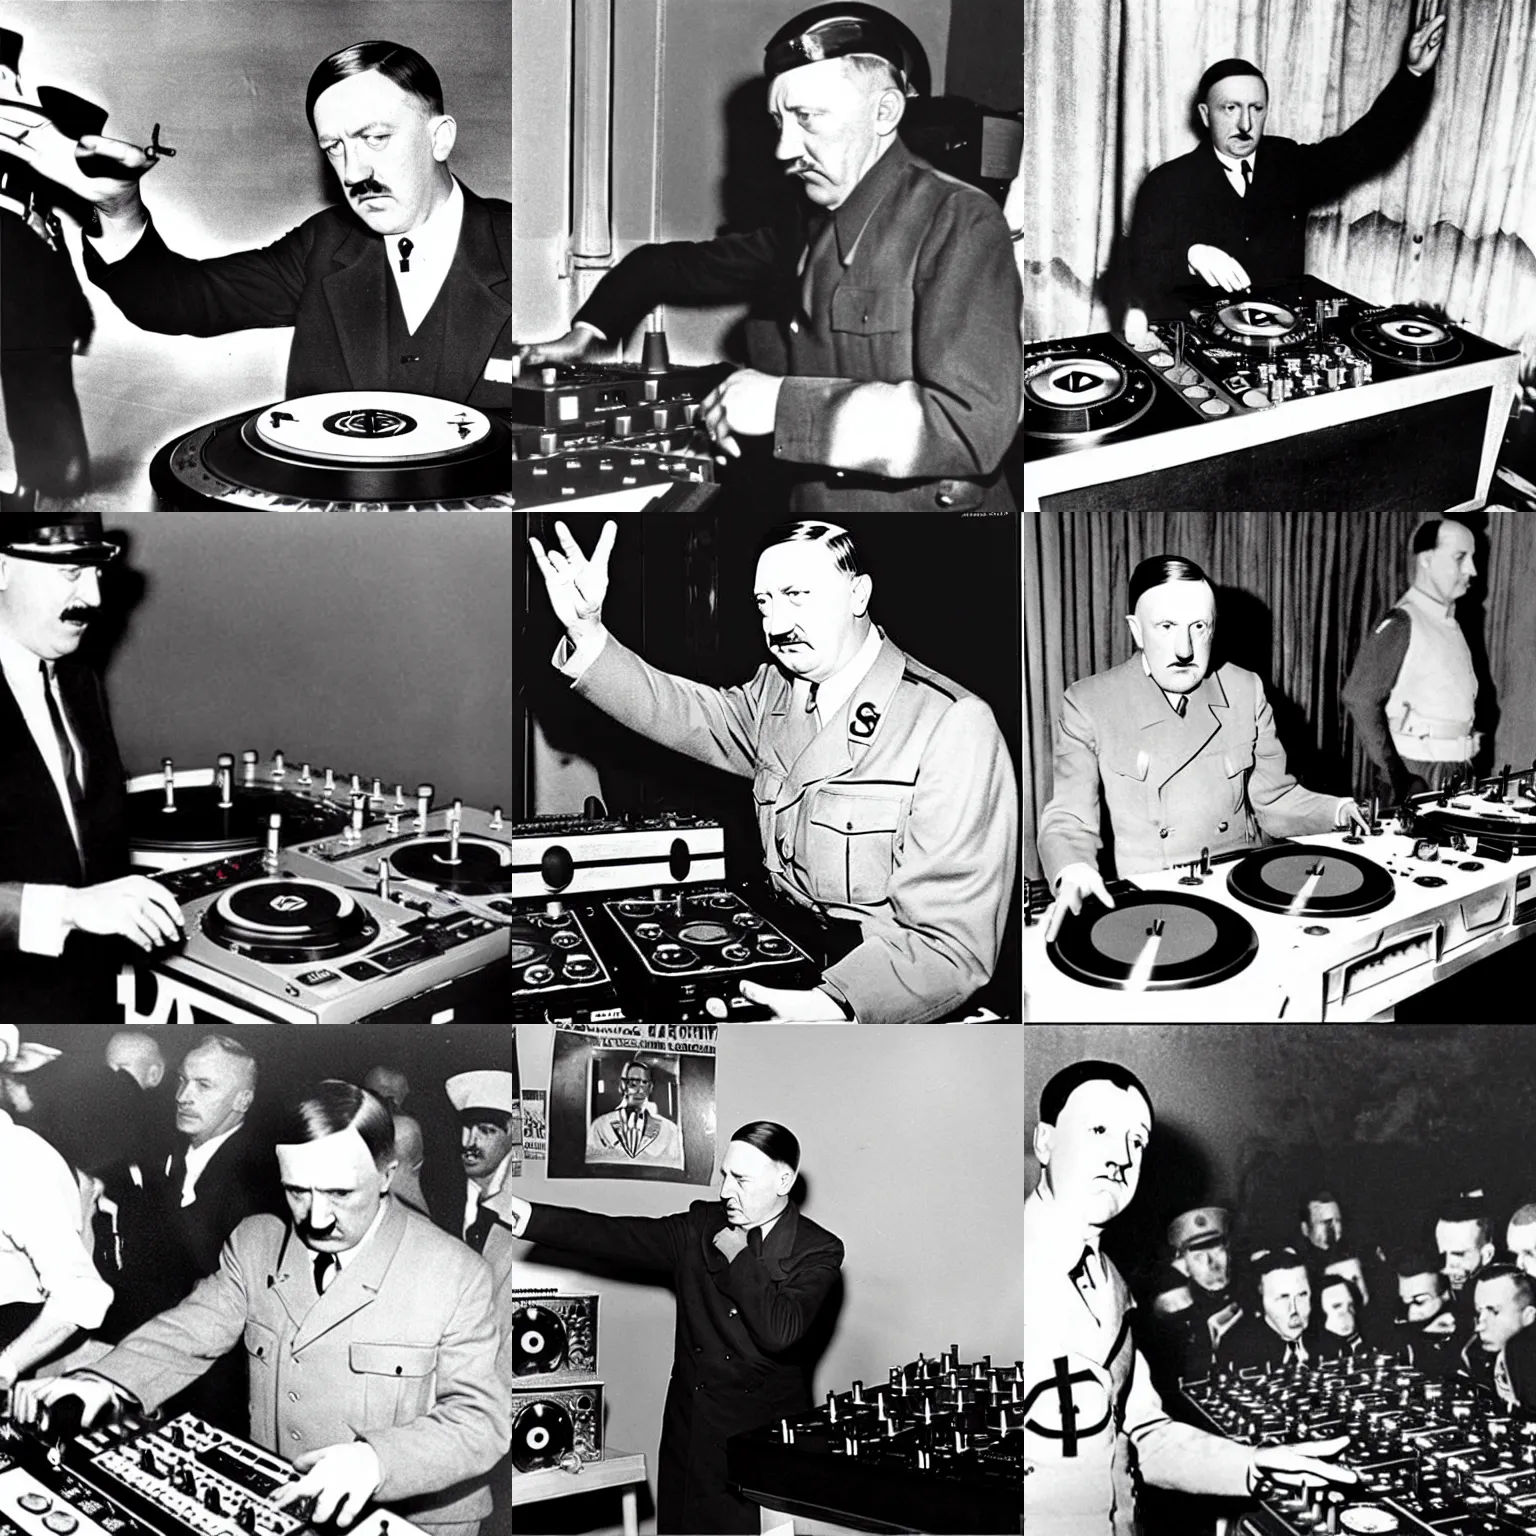 Prompt: Hitler DJing with DJ turntables, photoreal